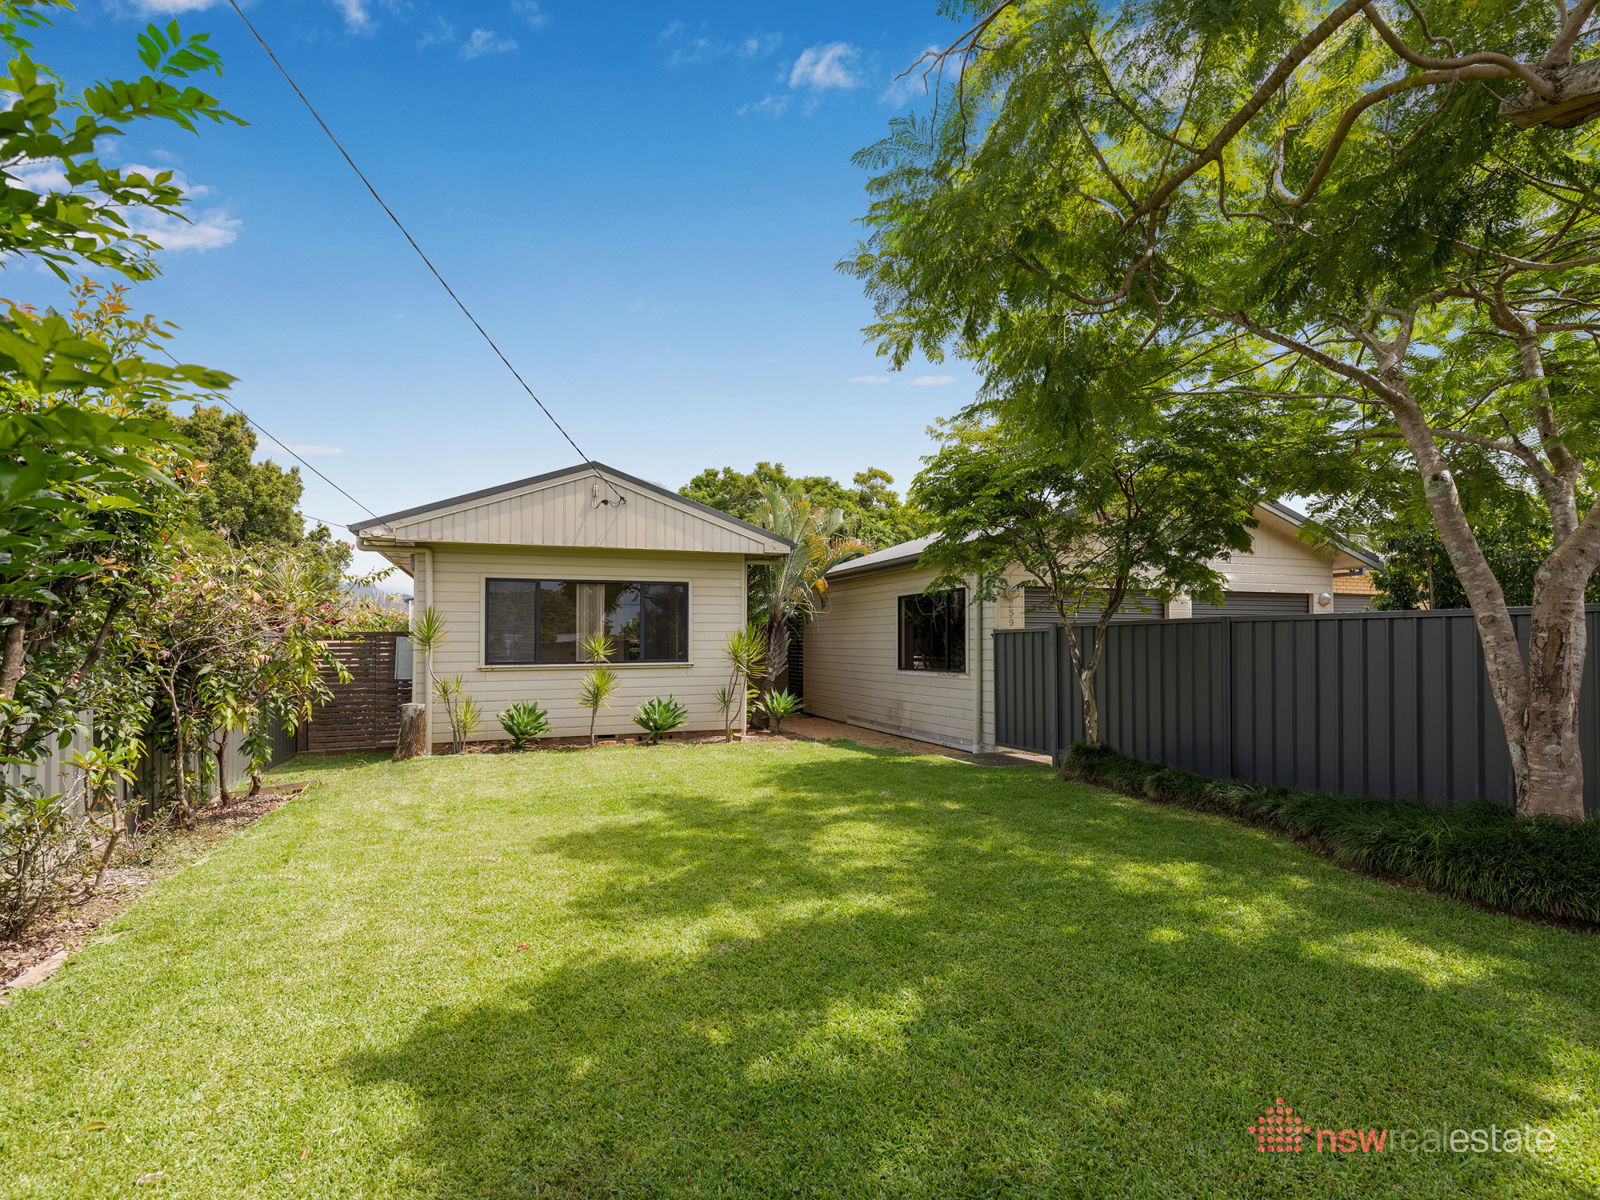 Purchase of property in Sawtell